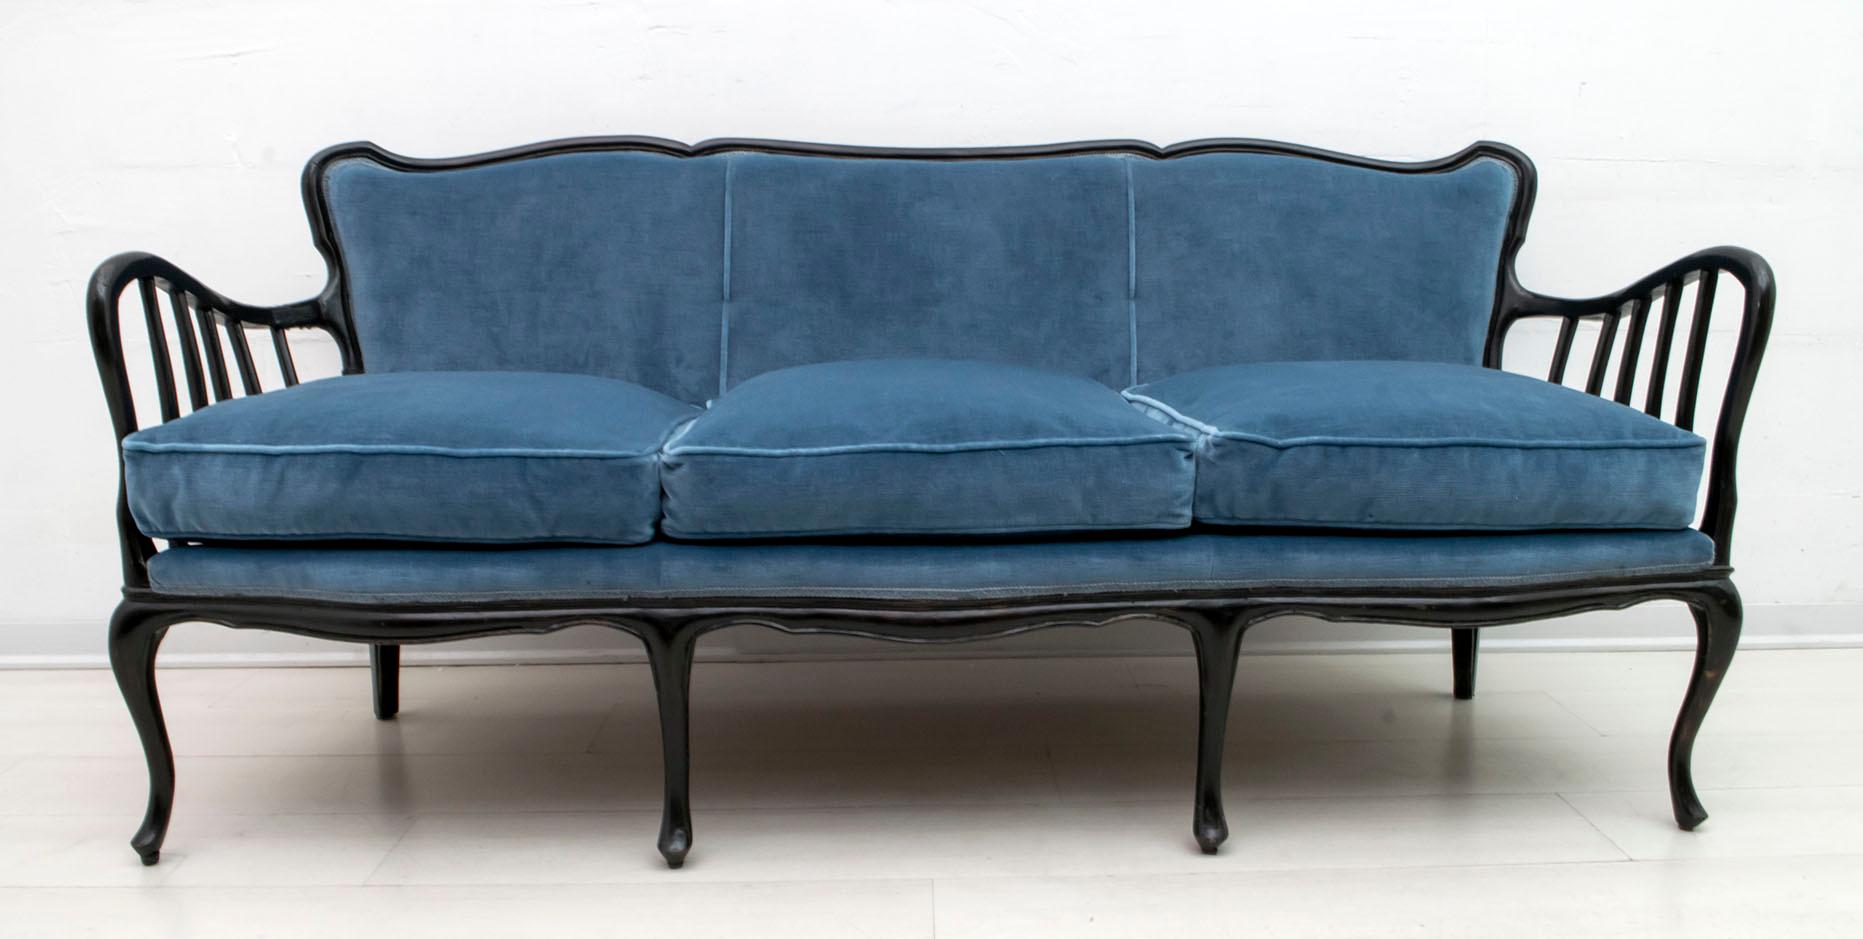 Paolo Buffa 3-seat sofa, structure in stained and polished beech, the blue velvet upholstery was redone a few years ago, the cushions are original in goose down.